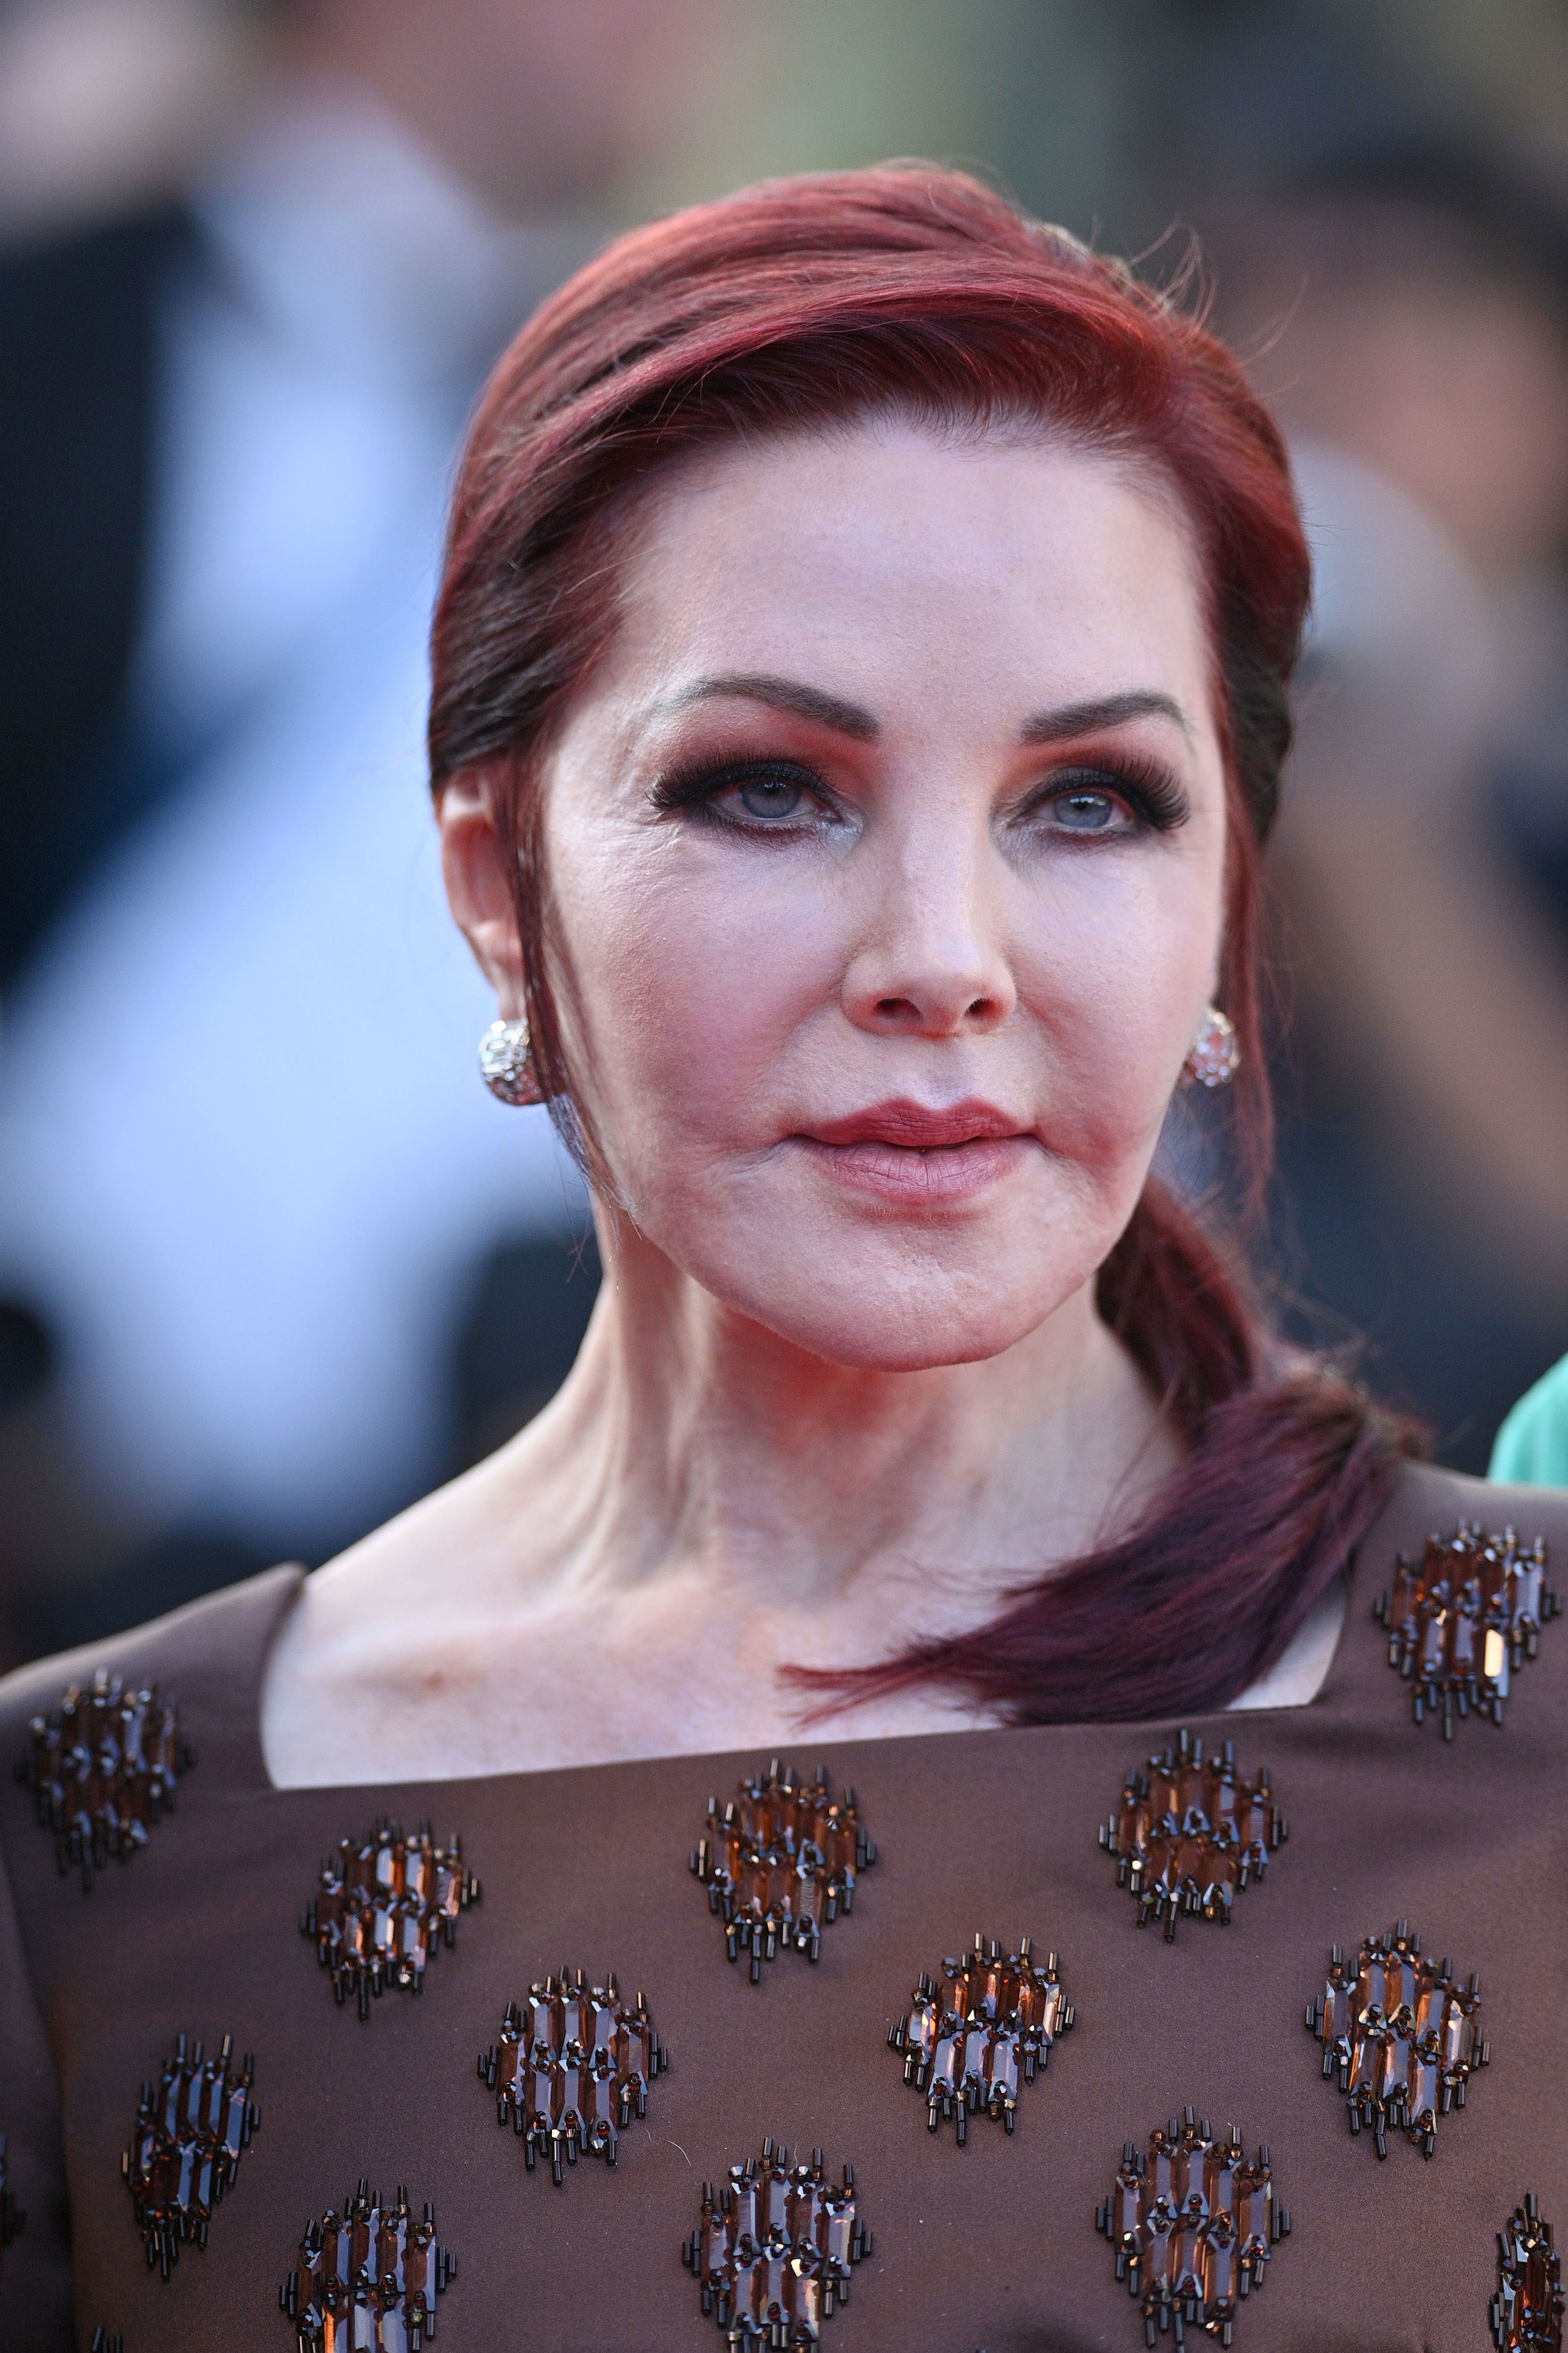 <p>These days, Priscilla Presley (pictured in 2022) looks notably different. Though she hasn't opened up about specific procedures, in 2015, her former rep confirmed that the former Mrs. Elvis Presley had gotten work done by a phony doctor was was prosecuted for operating without a license. "Priscilla Presley was one of many documented victims of Dr. [Daniel] Serrano. An investigation which uncovered his misconduct ultimately lead to his imprisonment. Ms. Presley dealt with this matter years ago and everything is well," her rep said in a statement.</p>